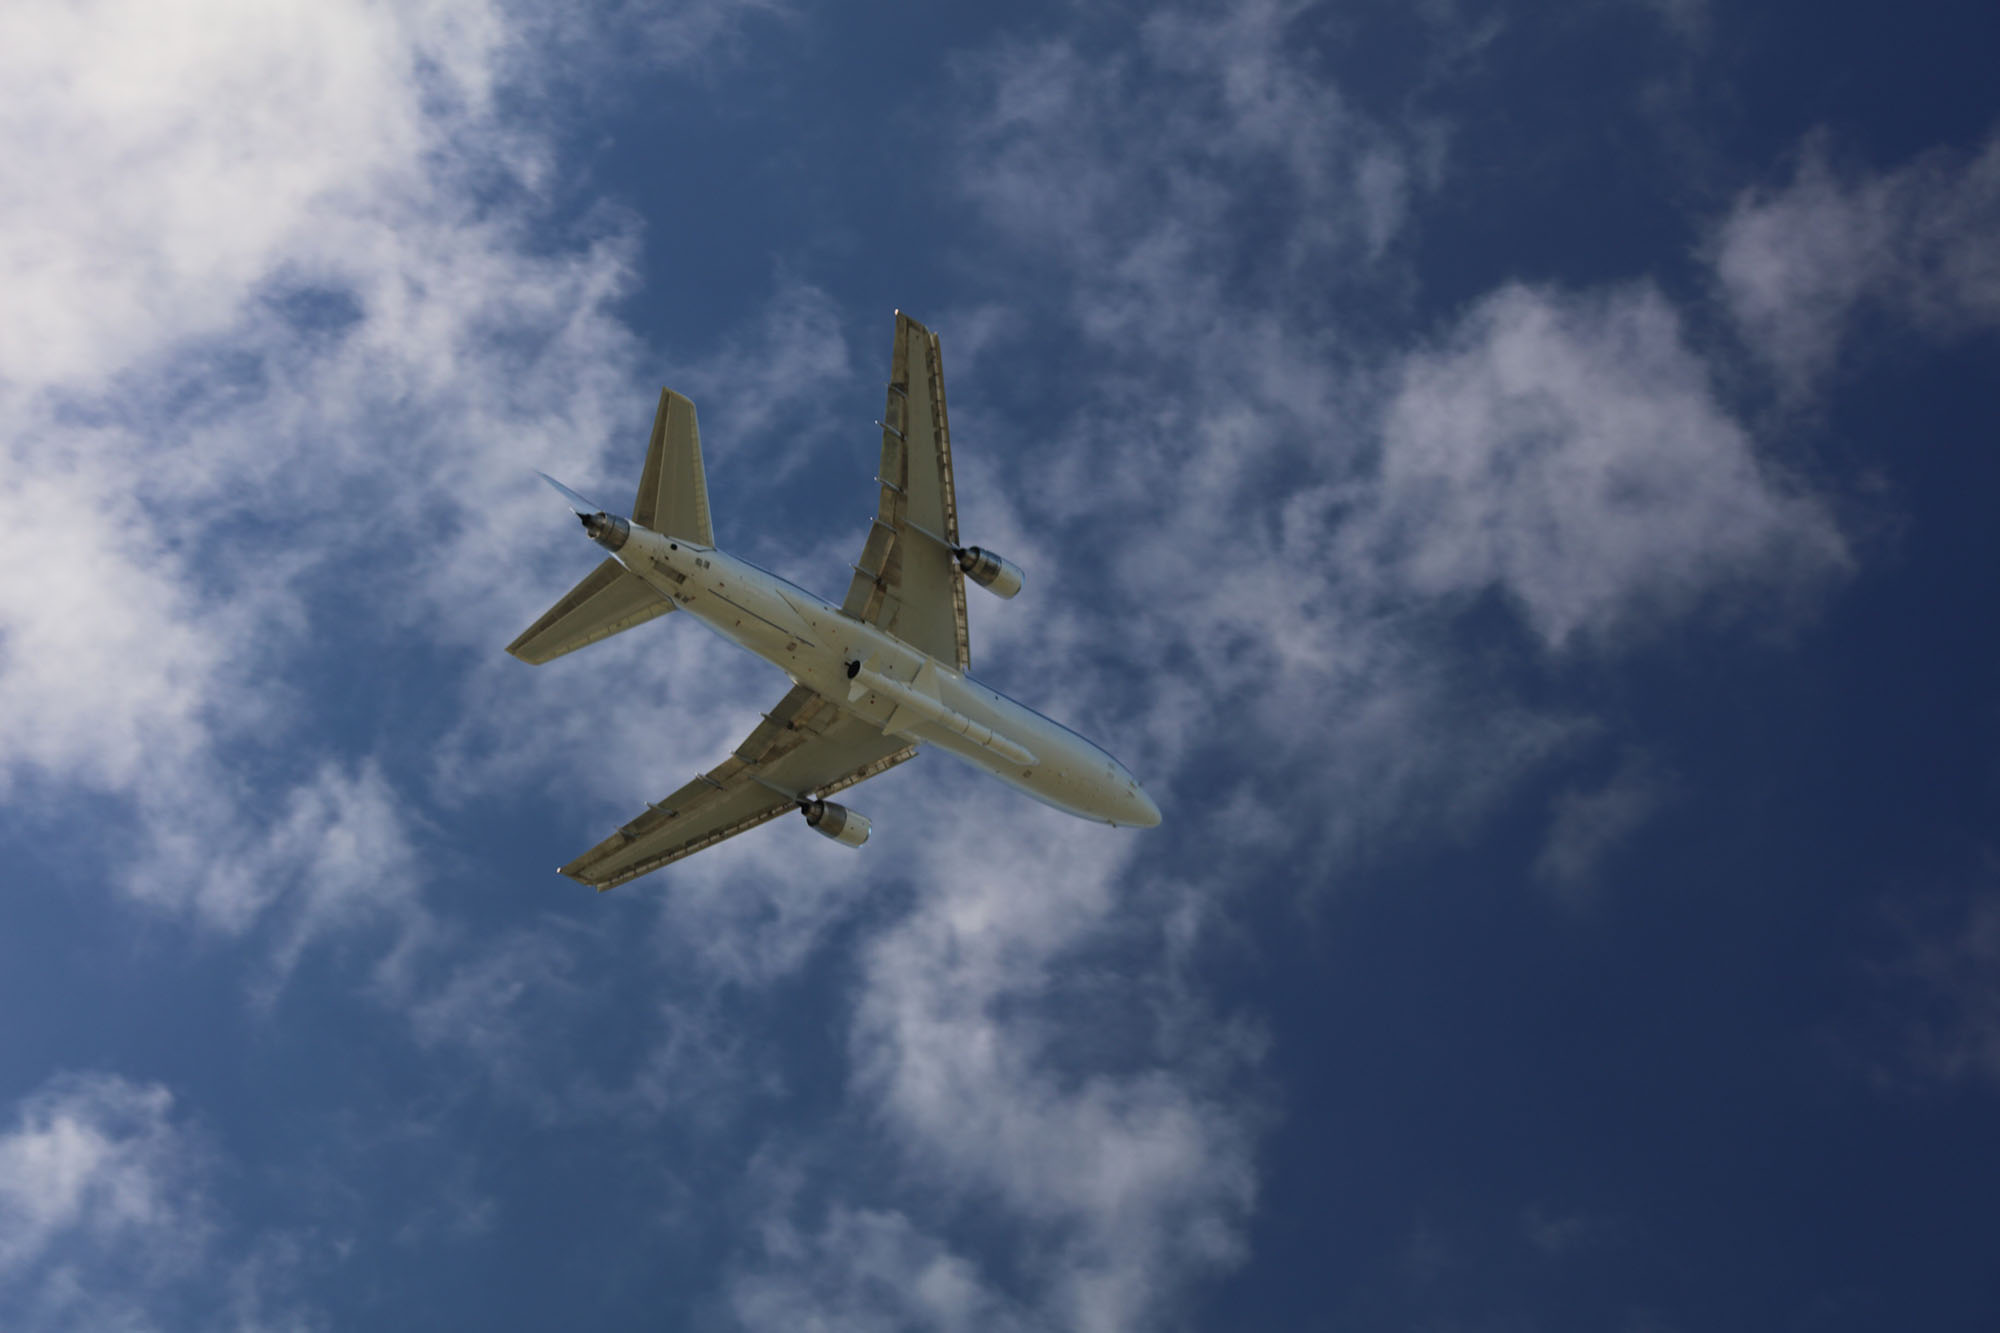 View from ground of the belly of an airplane carrying a rocket in a blue sky with light clouds